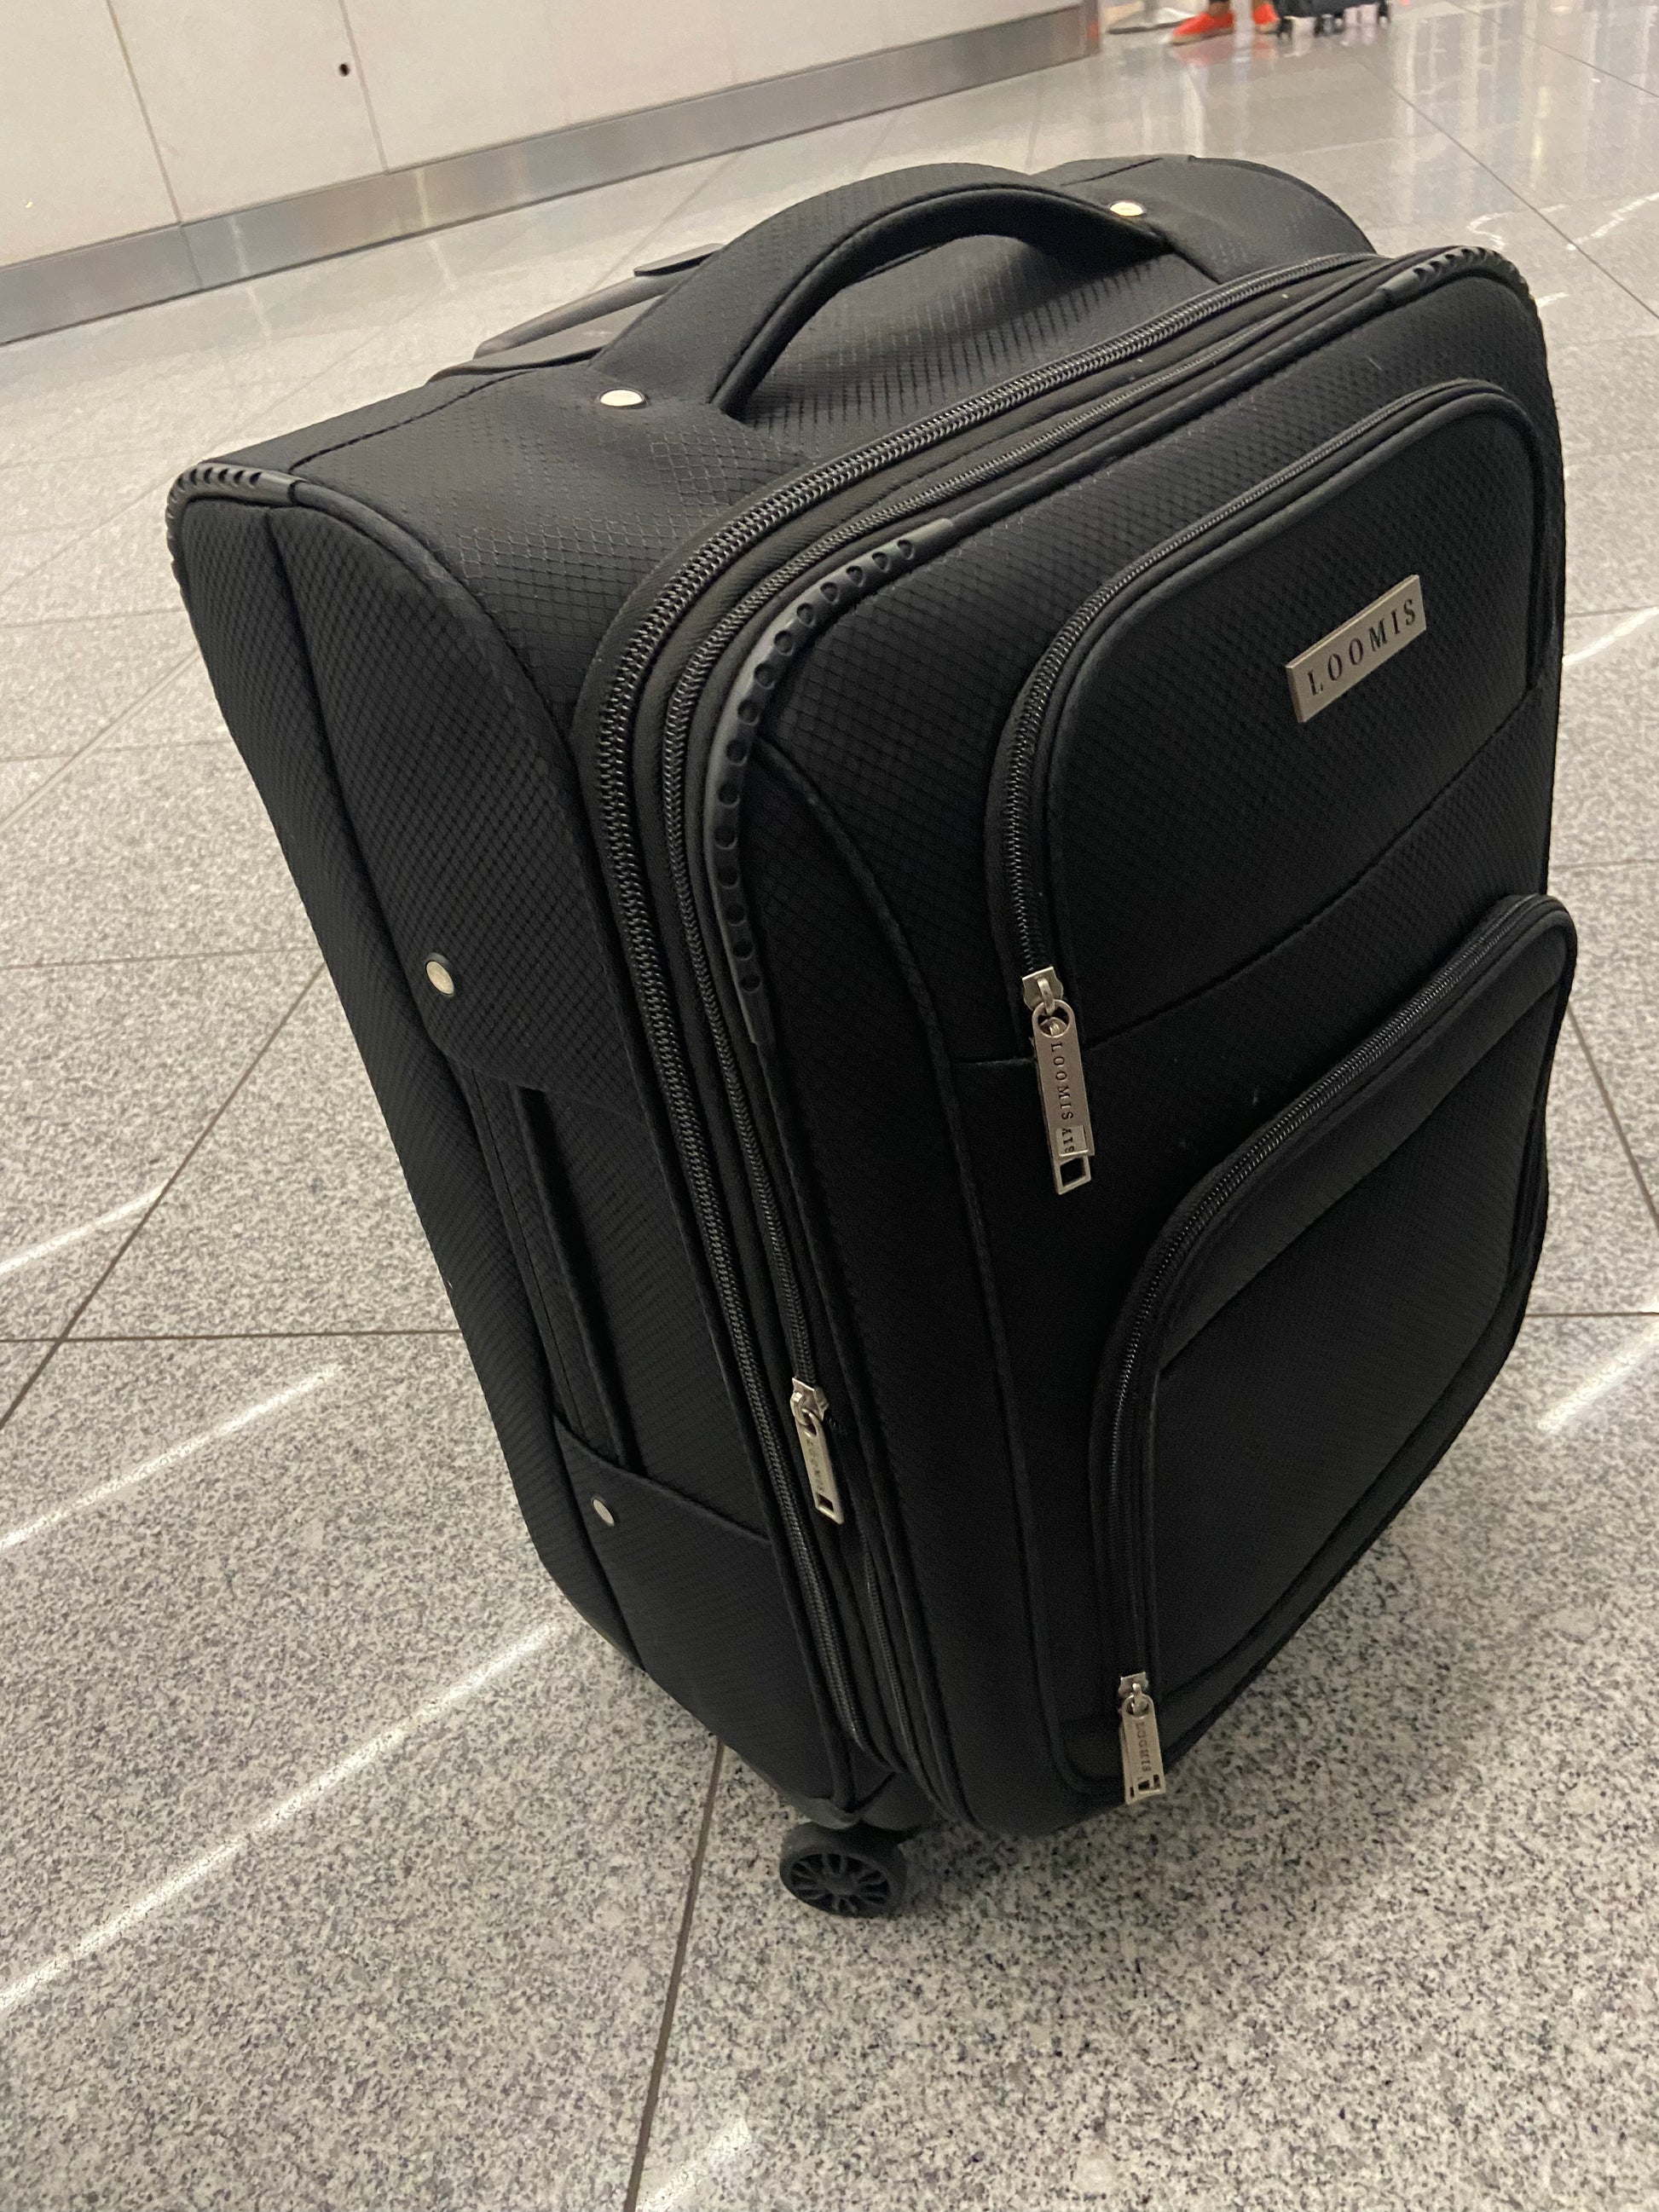 Loomis Expandable Lightweight Black Carry-On Spinner Luggage - 20 inch. Best Carryon and check in luggage with wheels. Best suitcase with wheels. Black carryon luggage. Black Checkin luggage 25 inch. Affordable durable luggage